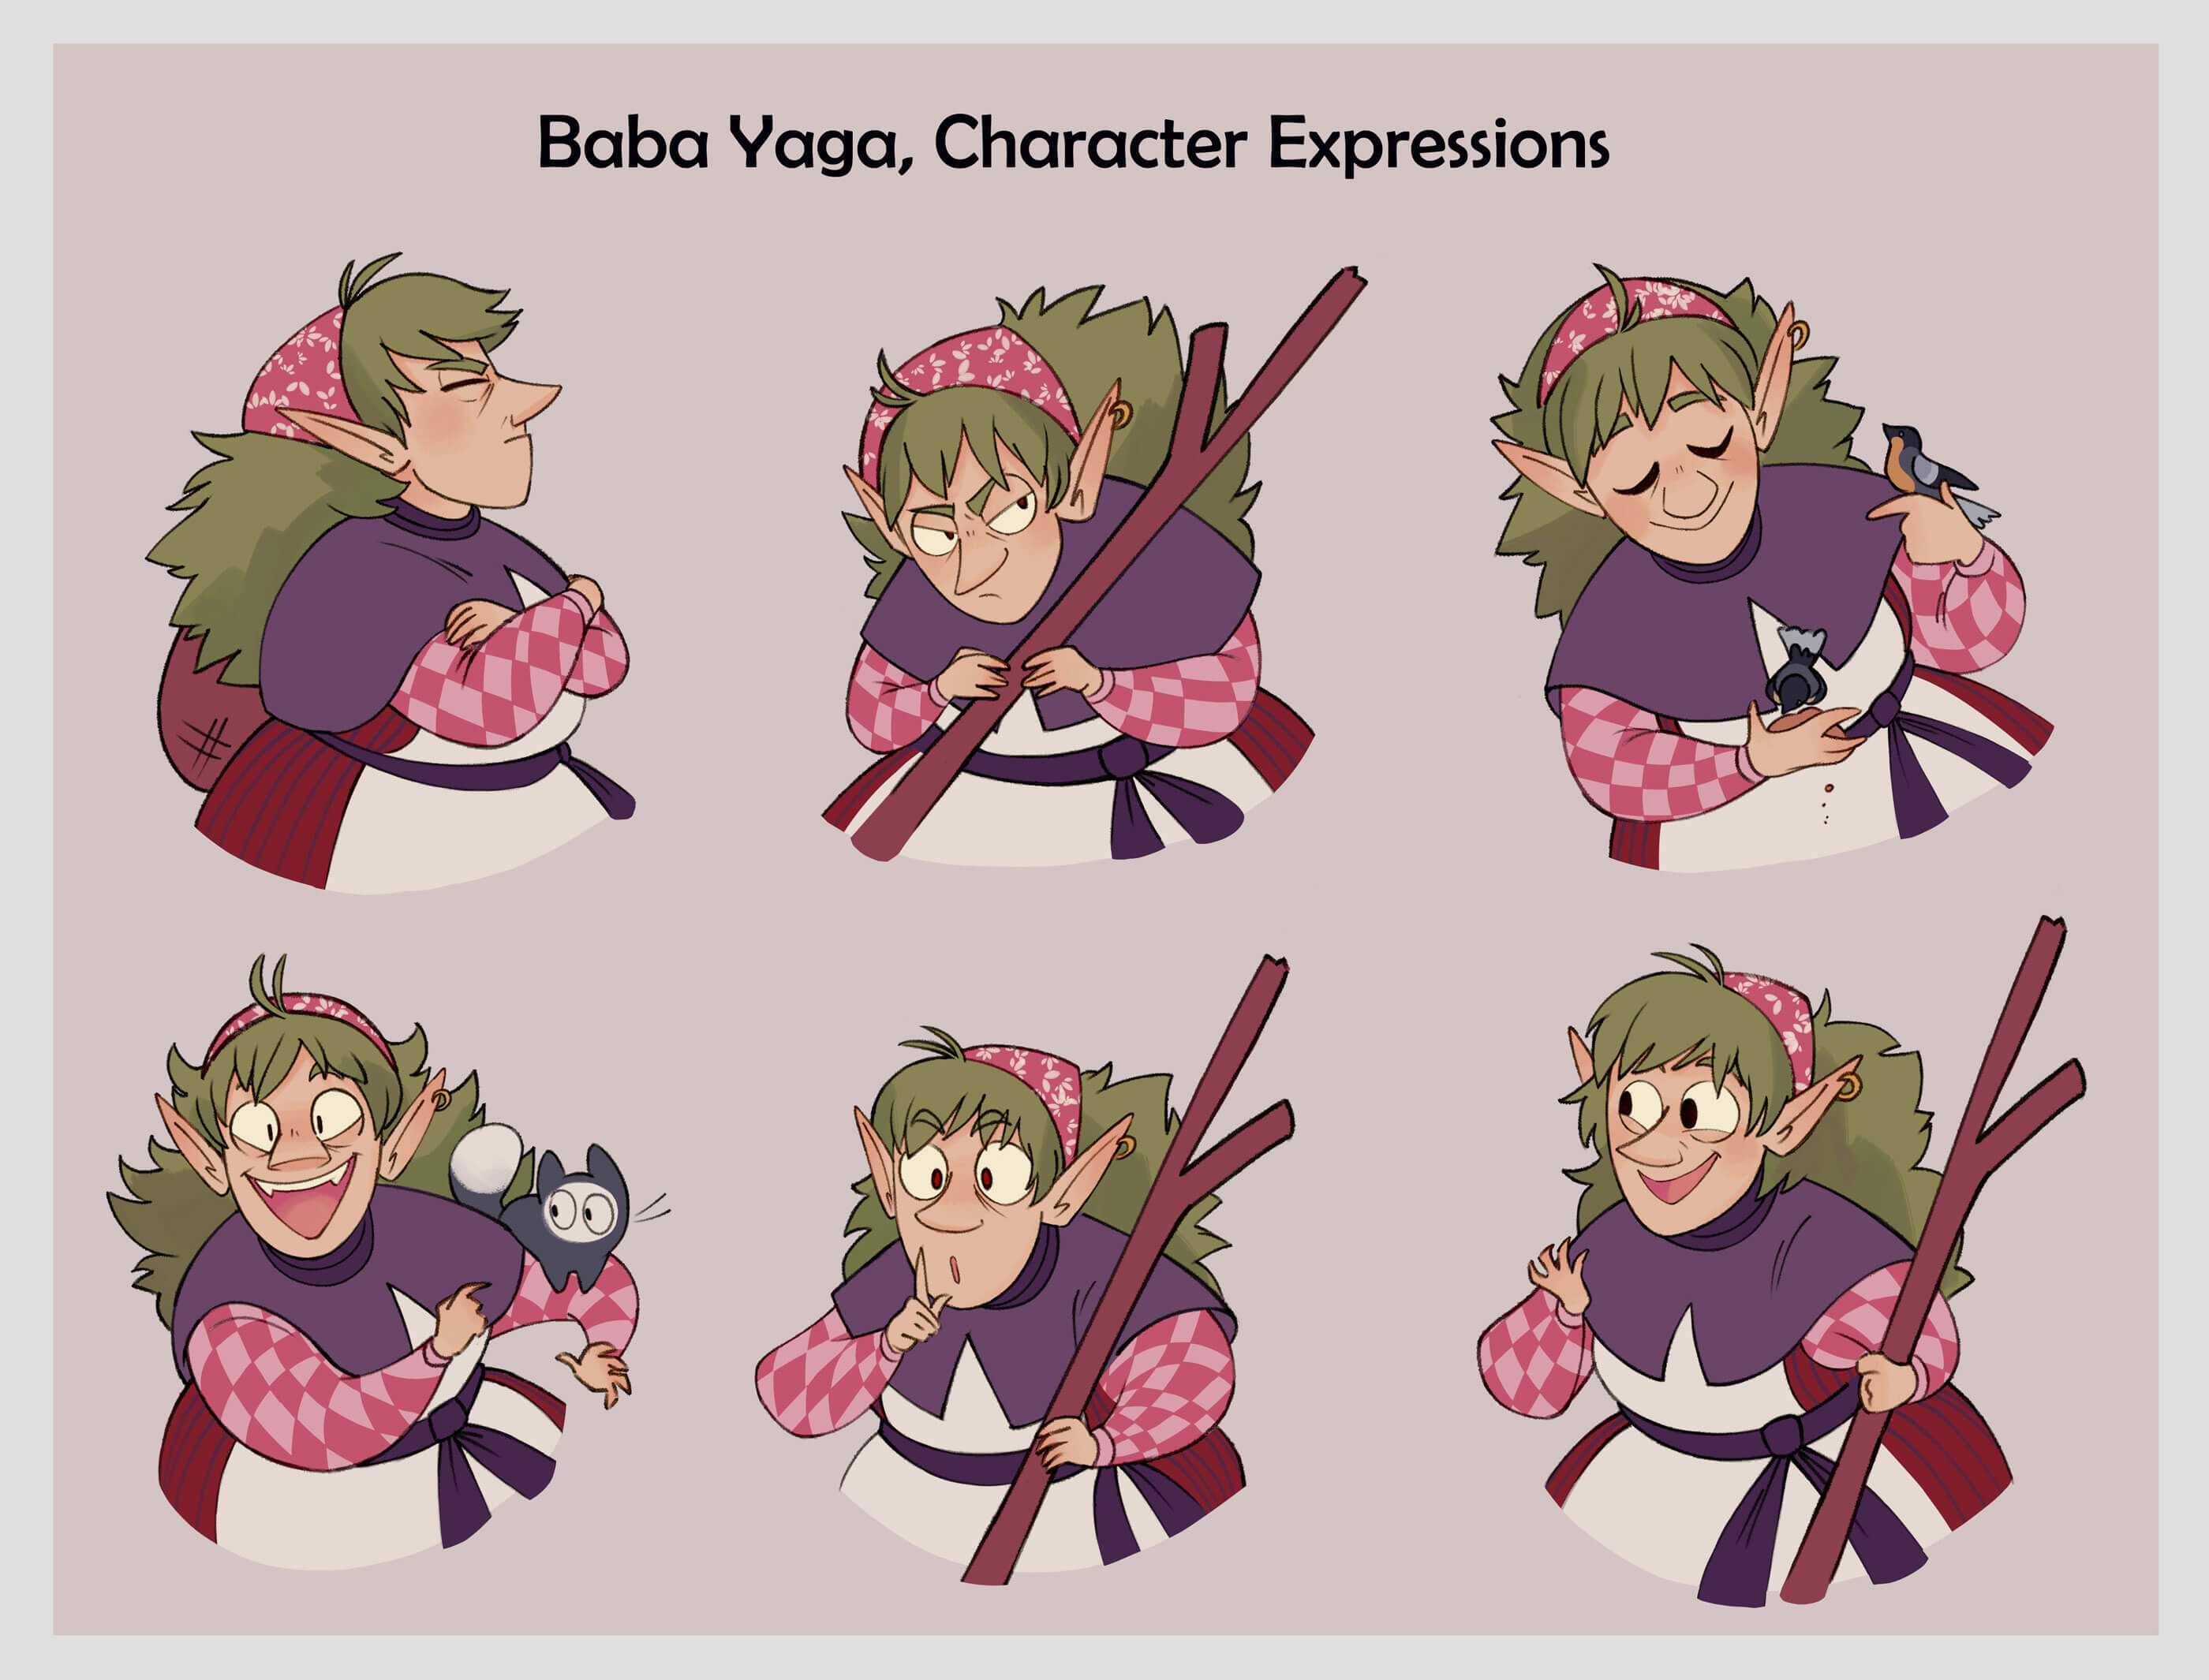 Character sheet of an old woman making various expressions.